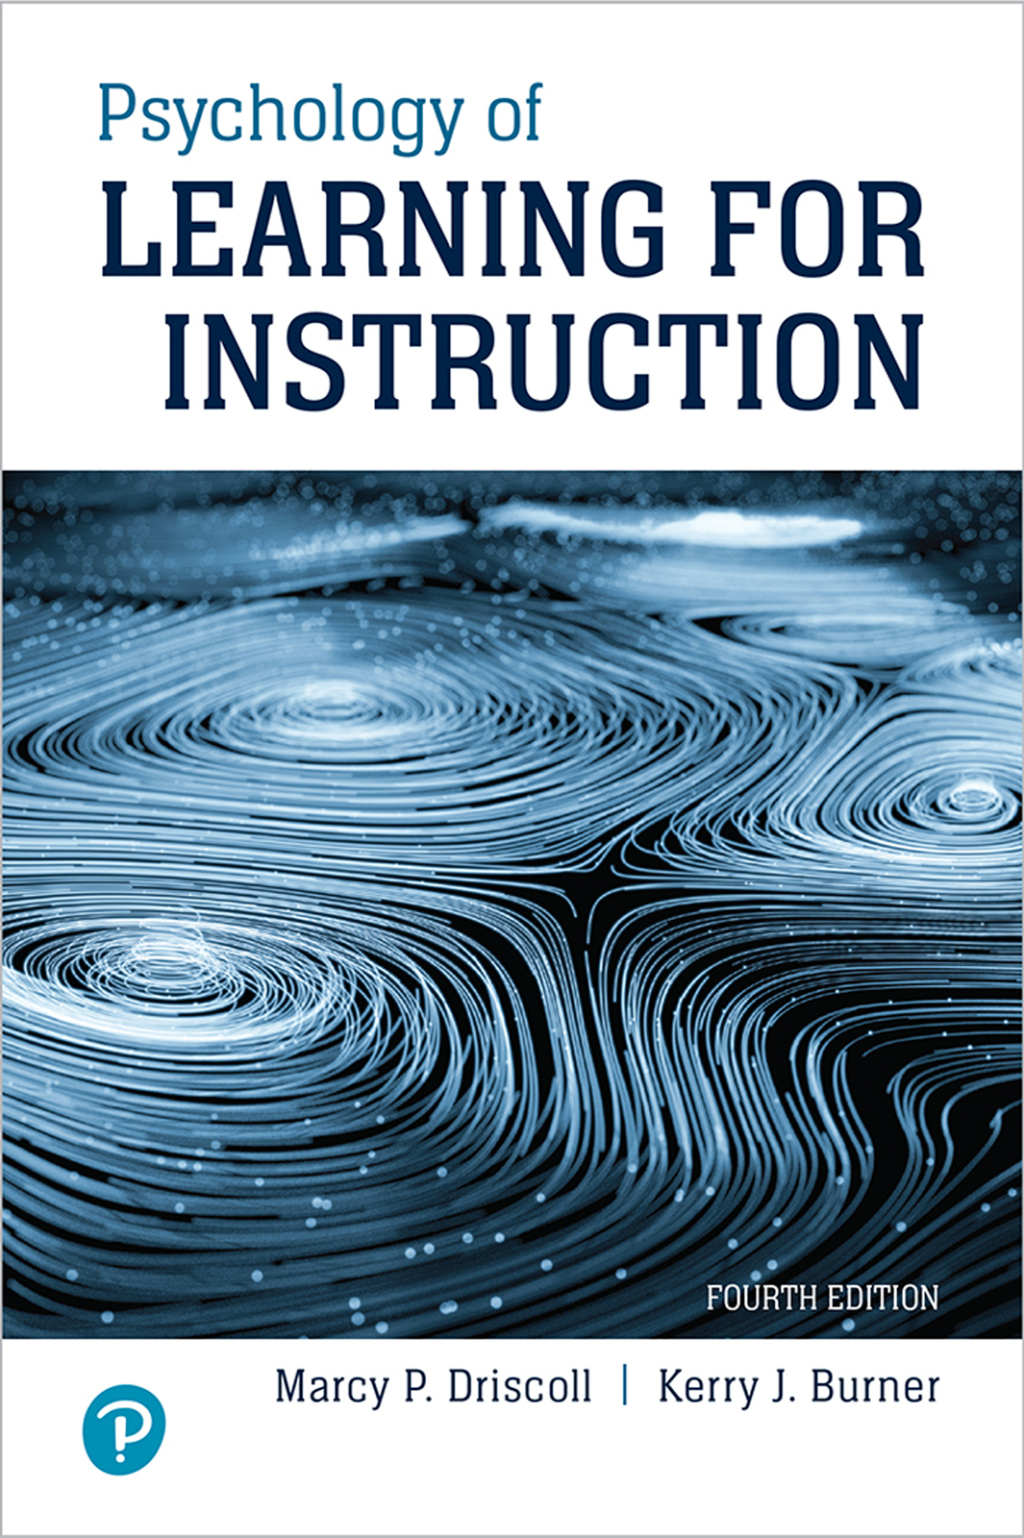 Psychology of Learning For Instruction - 4th Edition (eBook)